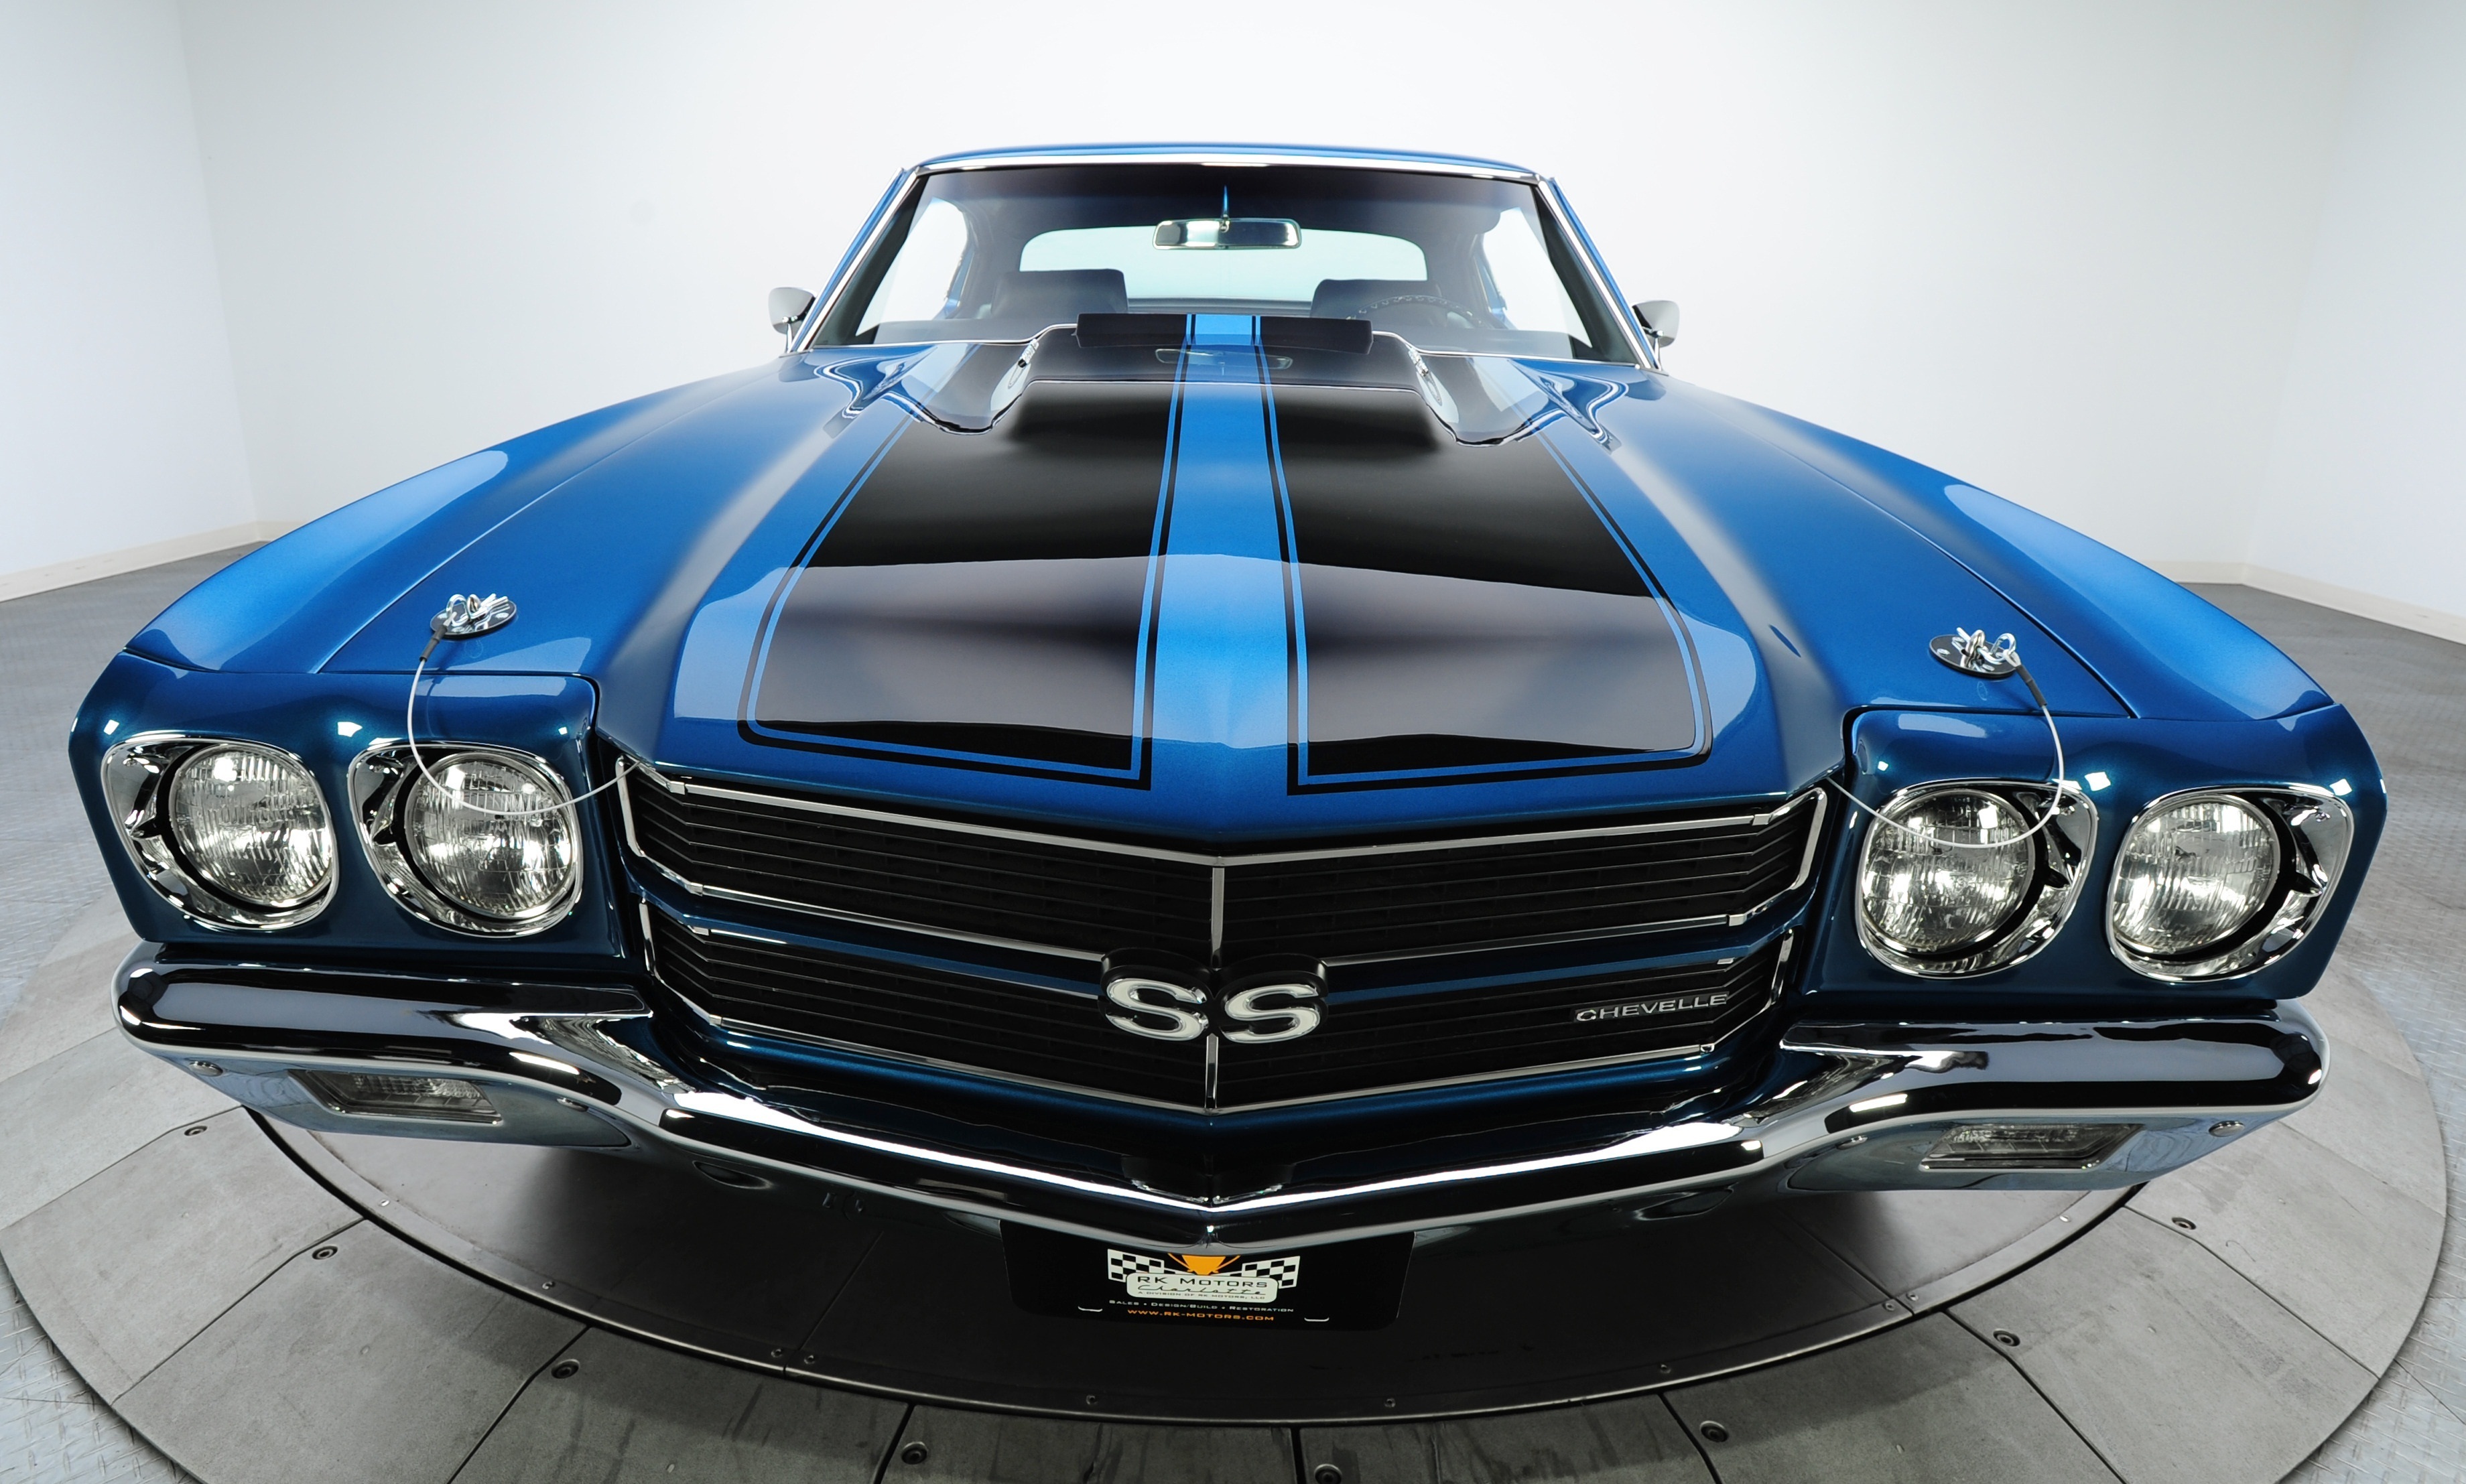 Car Chevrolet Chevrolet Chevelle Chevrolet Chevelle Ss Muscle Car Vehicle 3680x2215